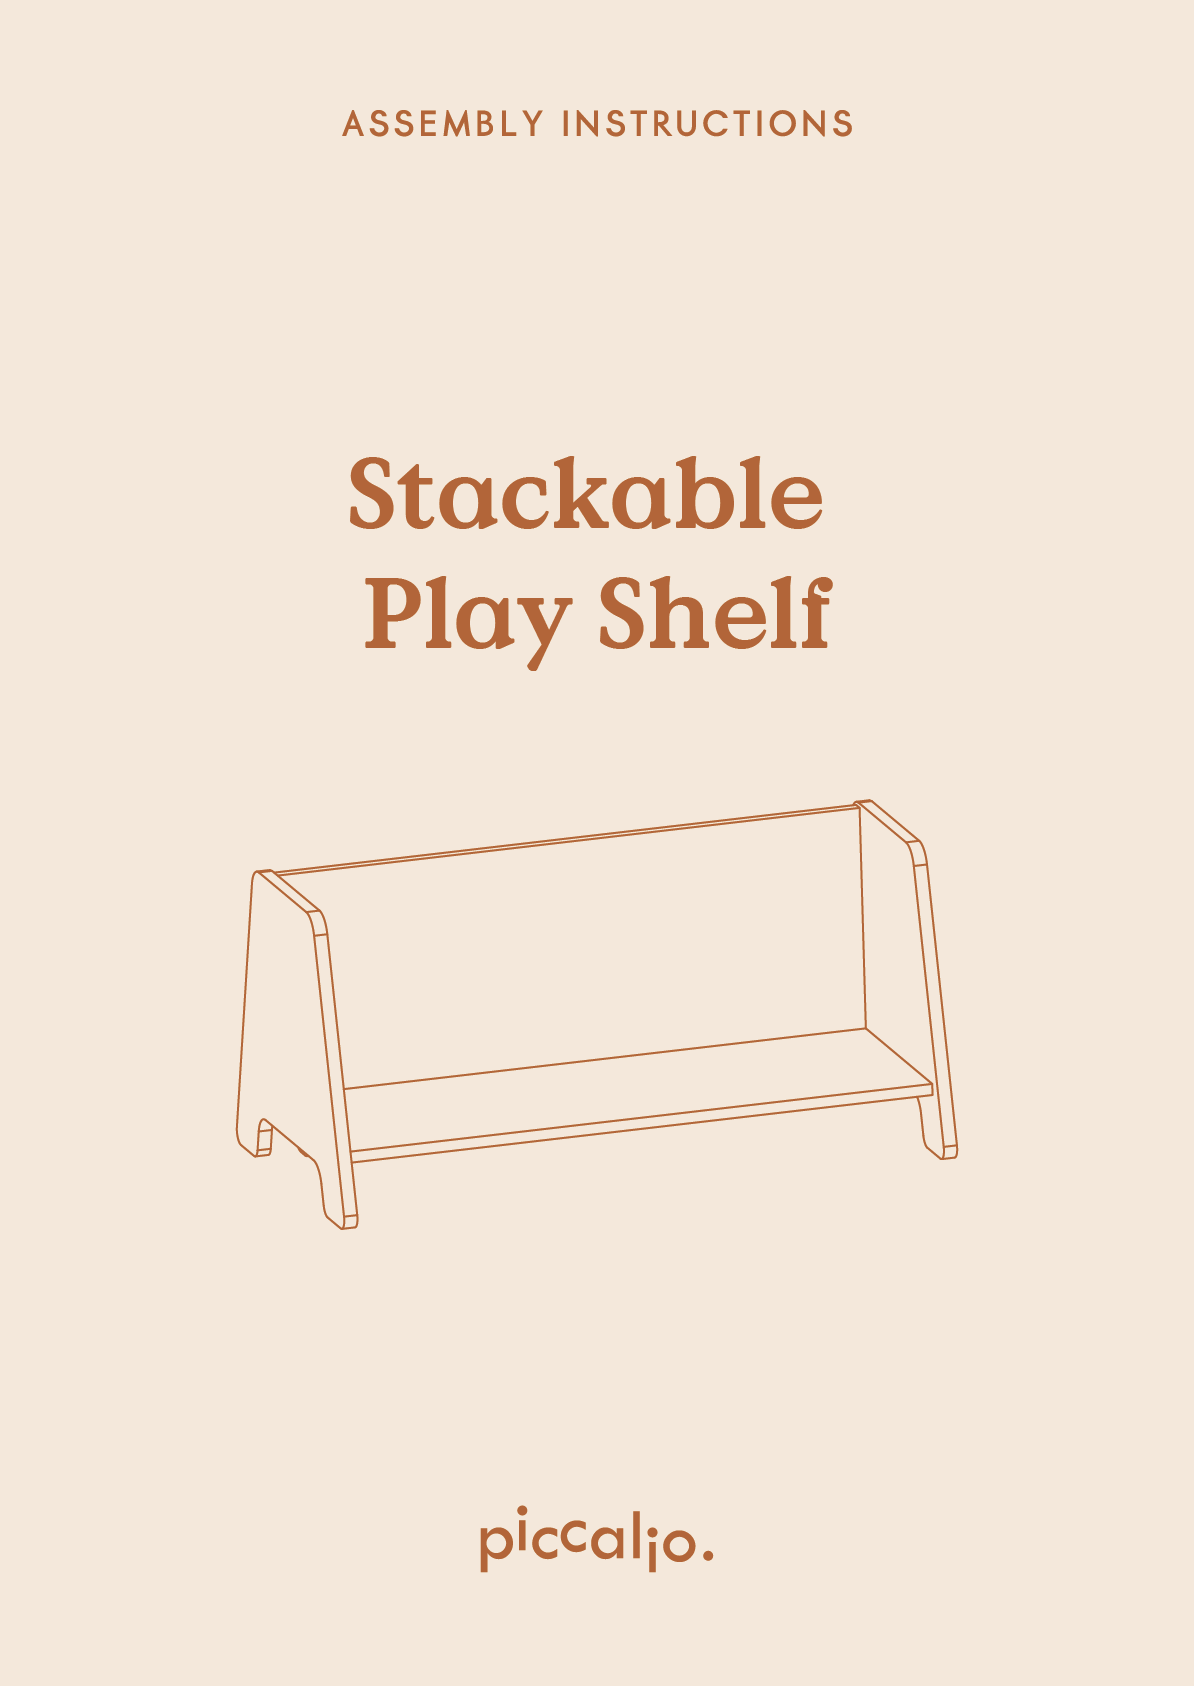 Assembly instructions of Piccalio Bookshelf